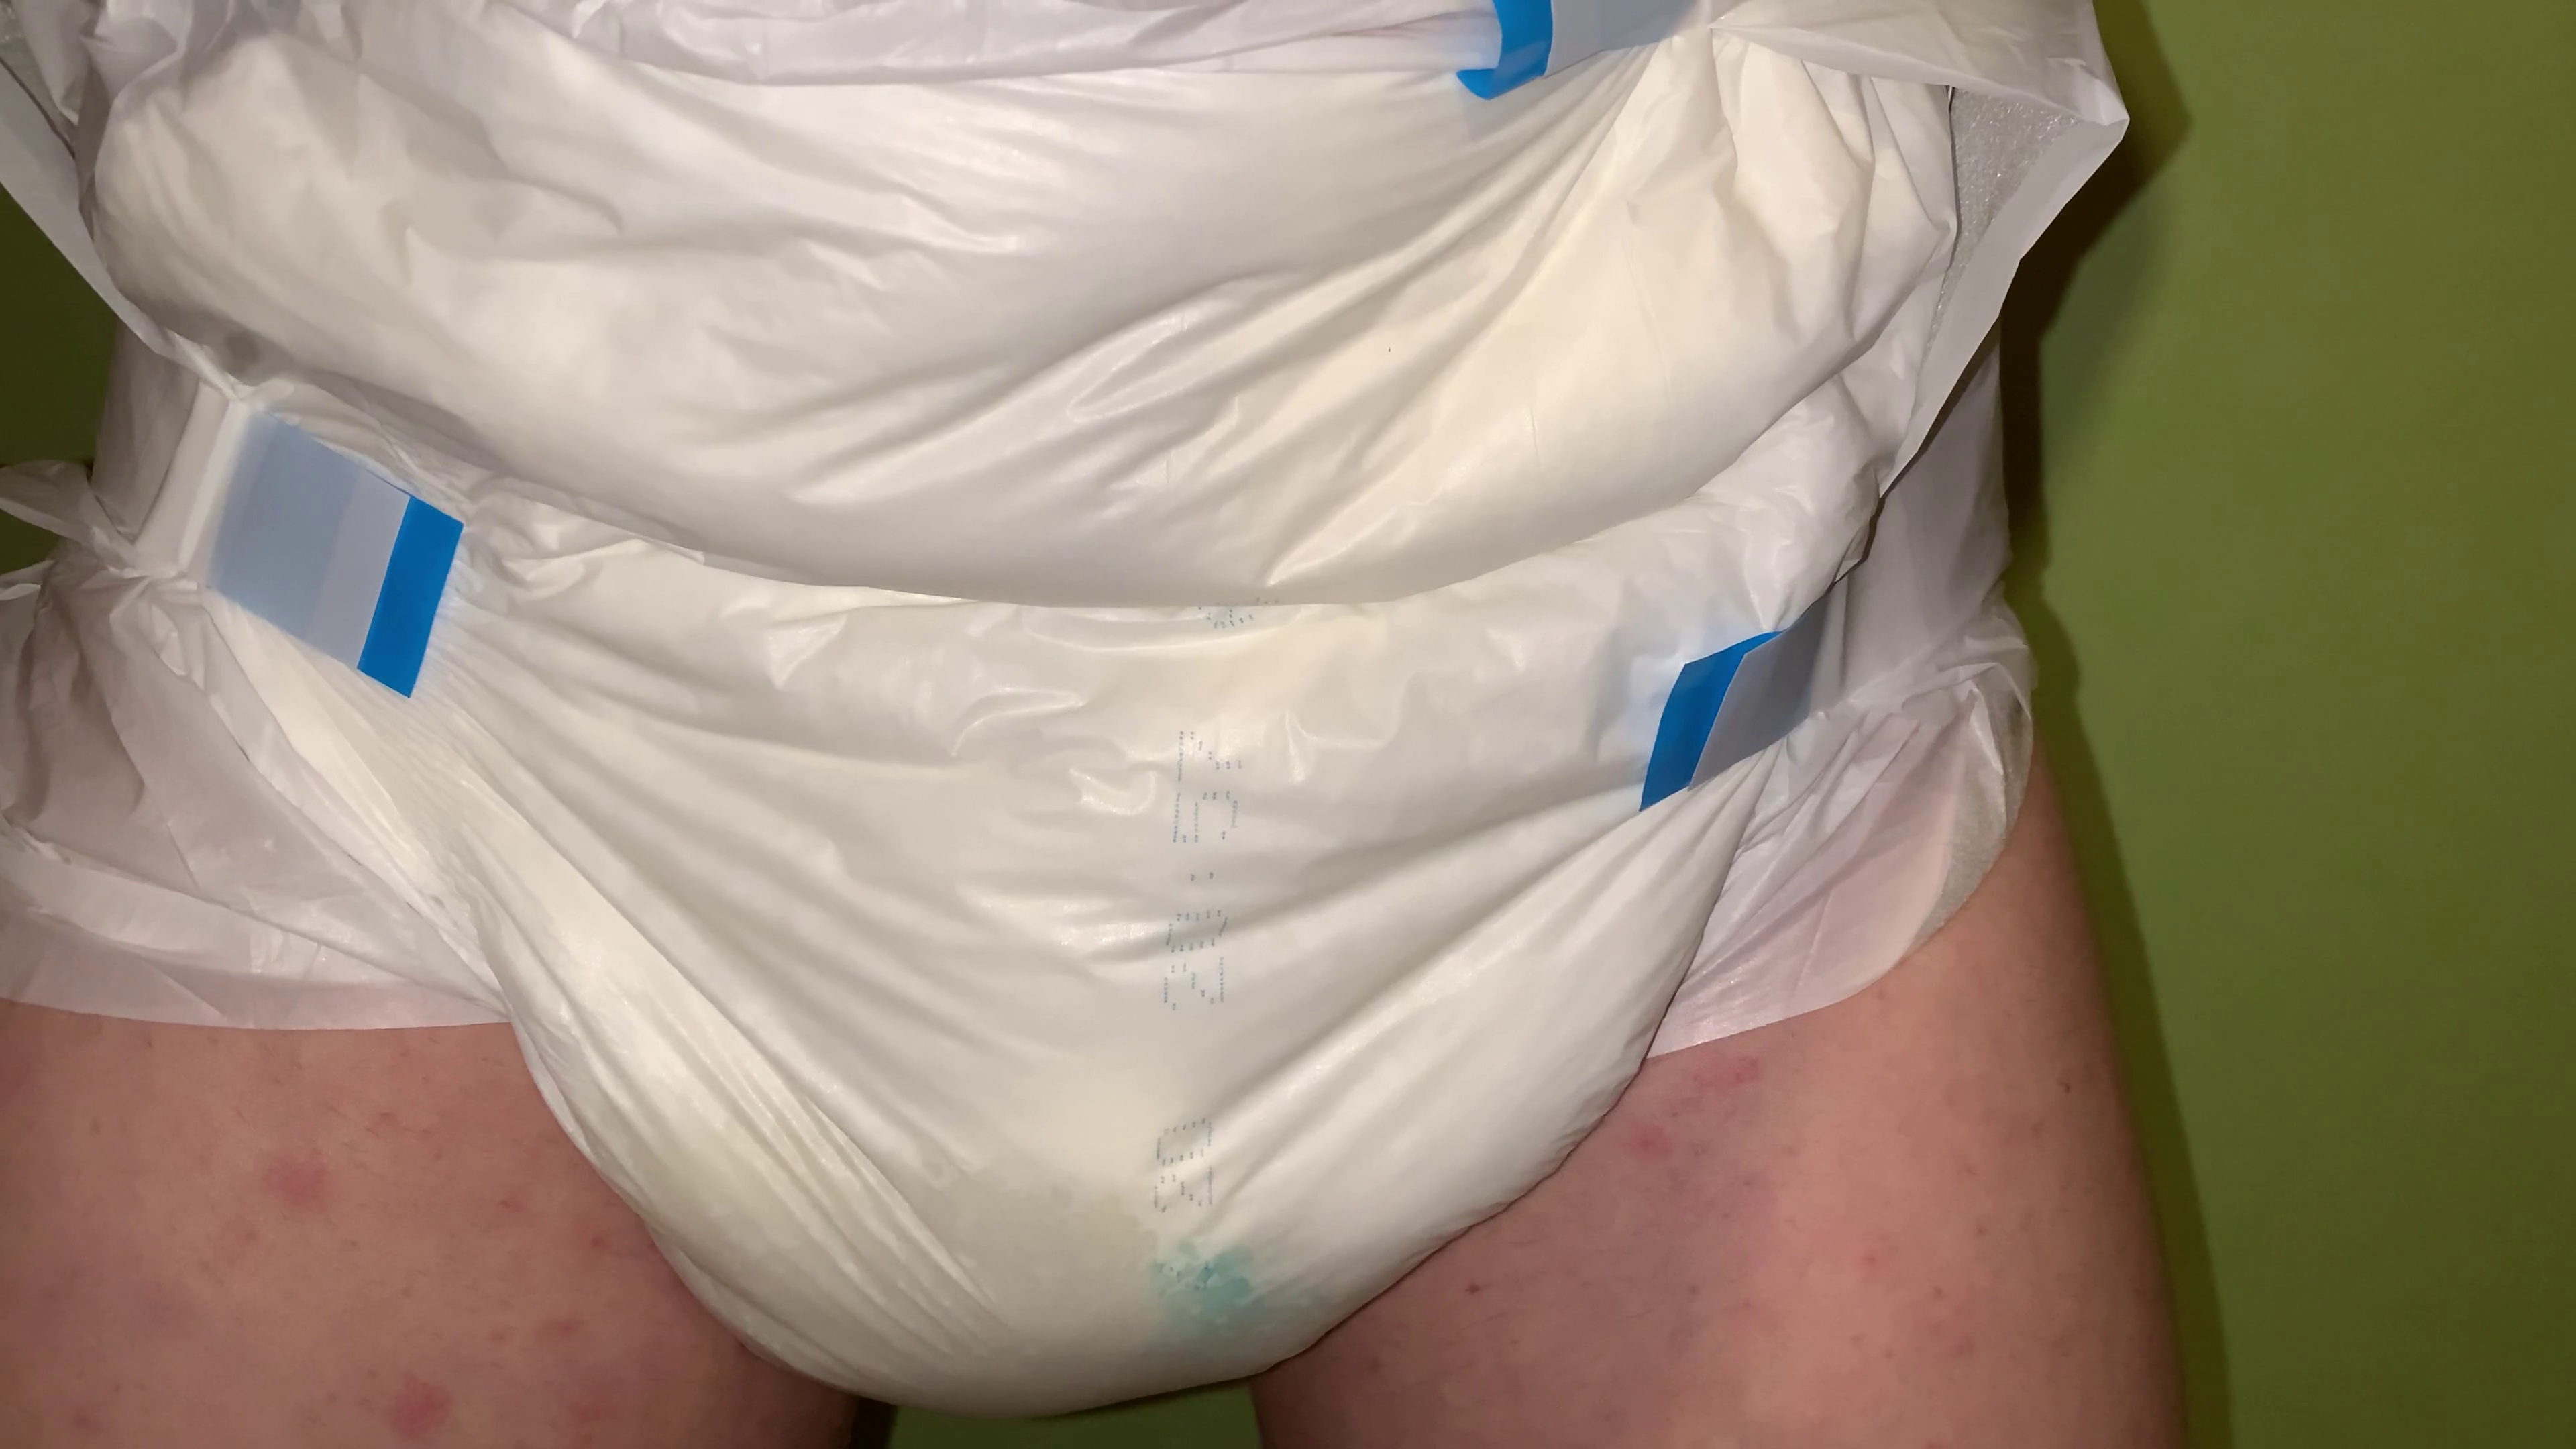 Diaper boy floods white adult diaper with pee - diaperpiss